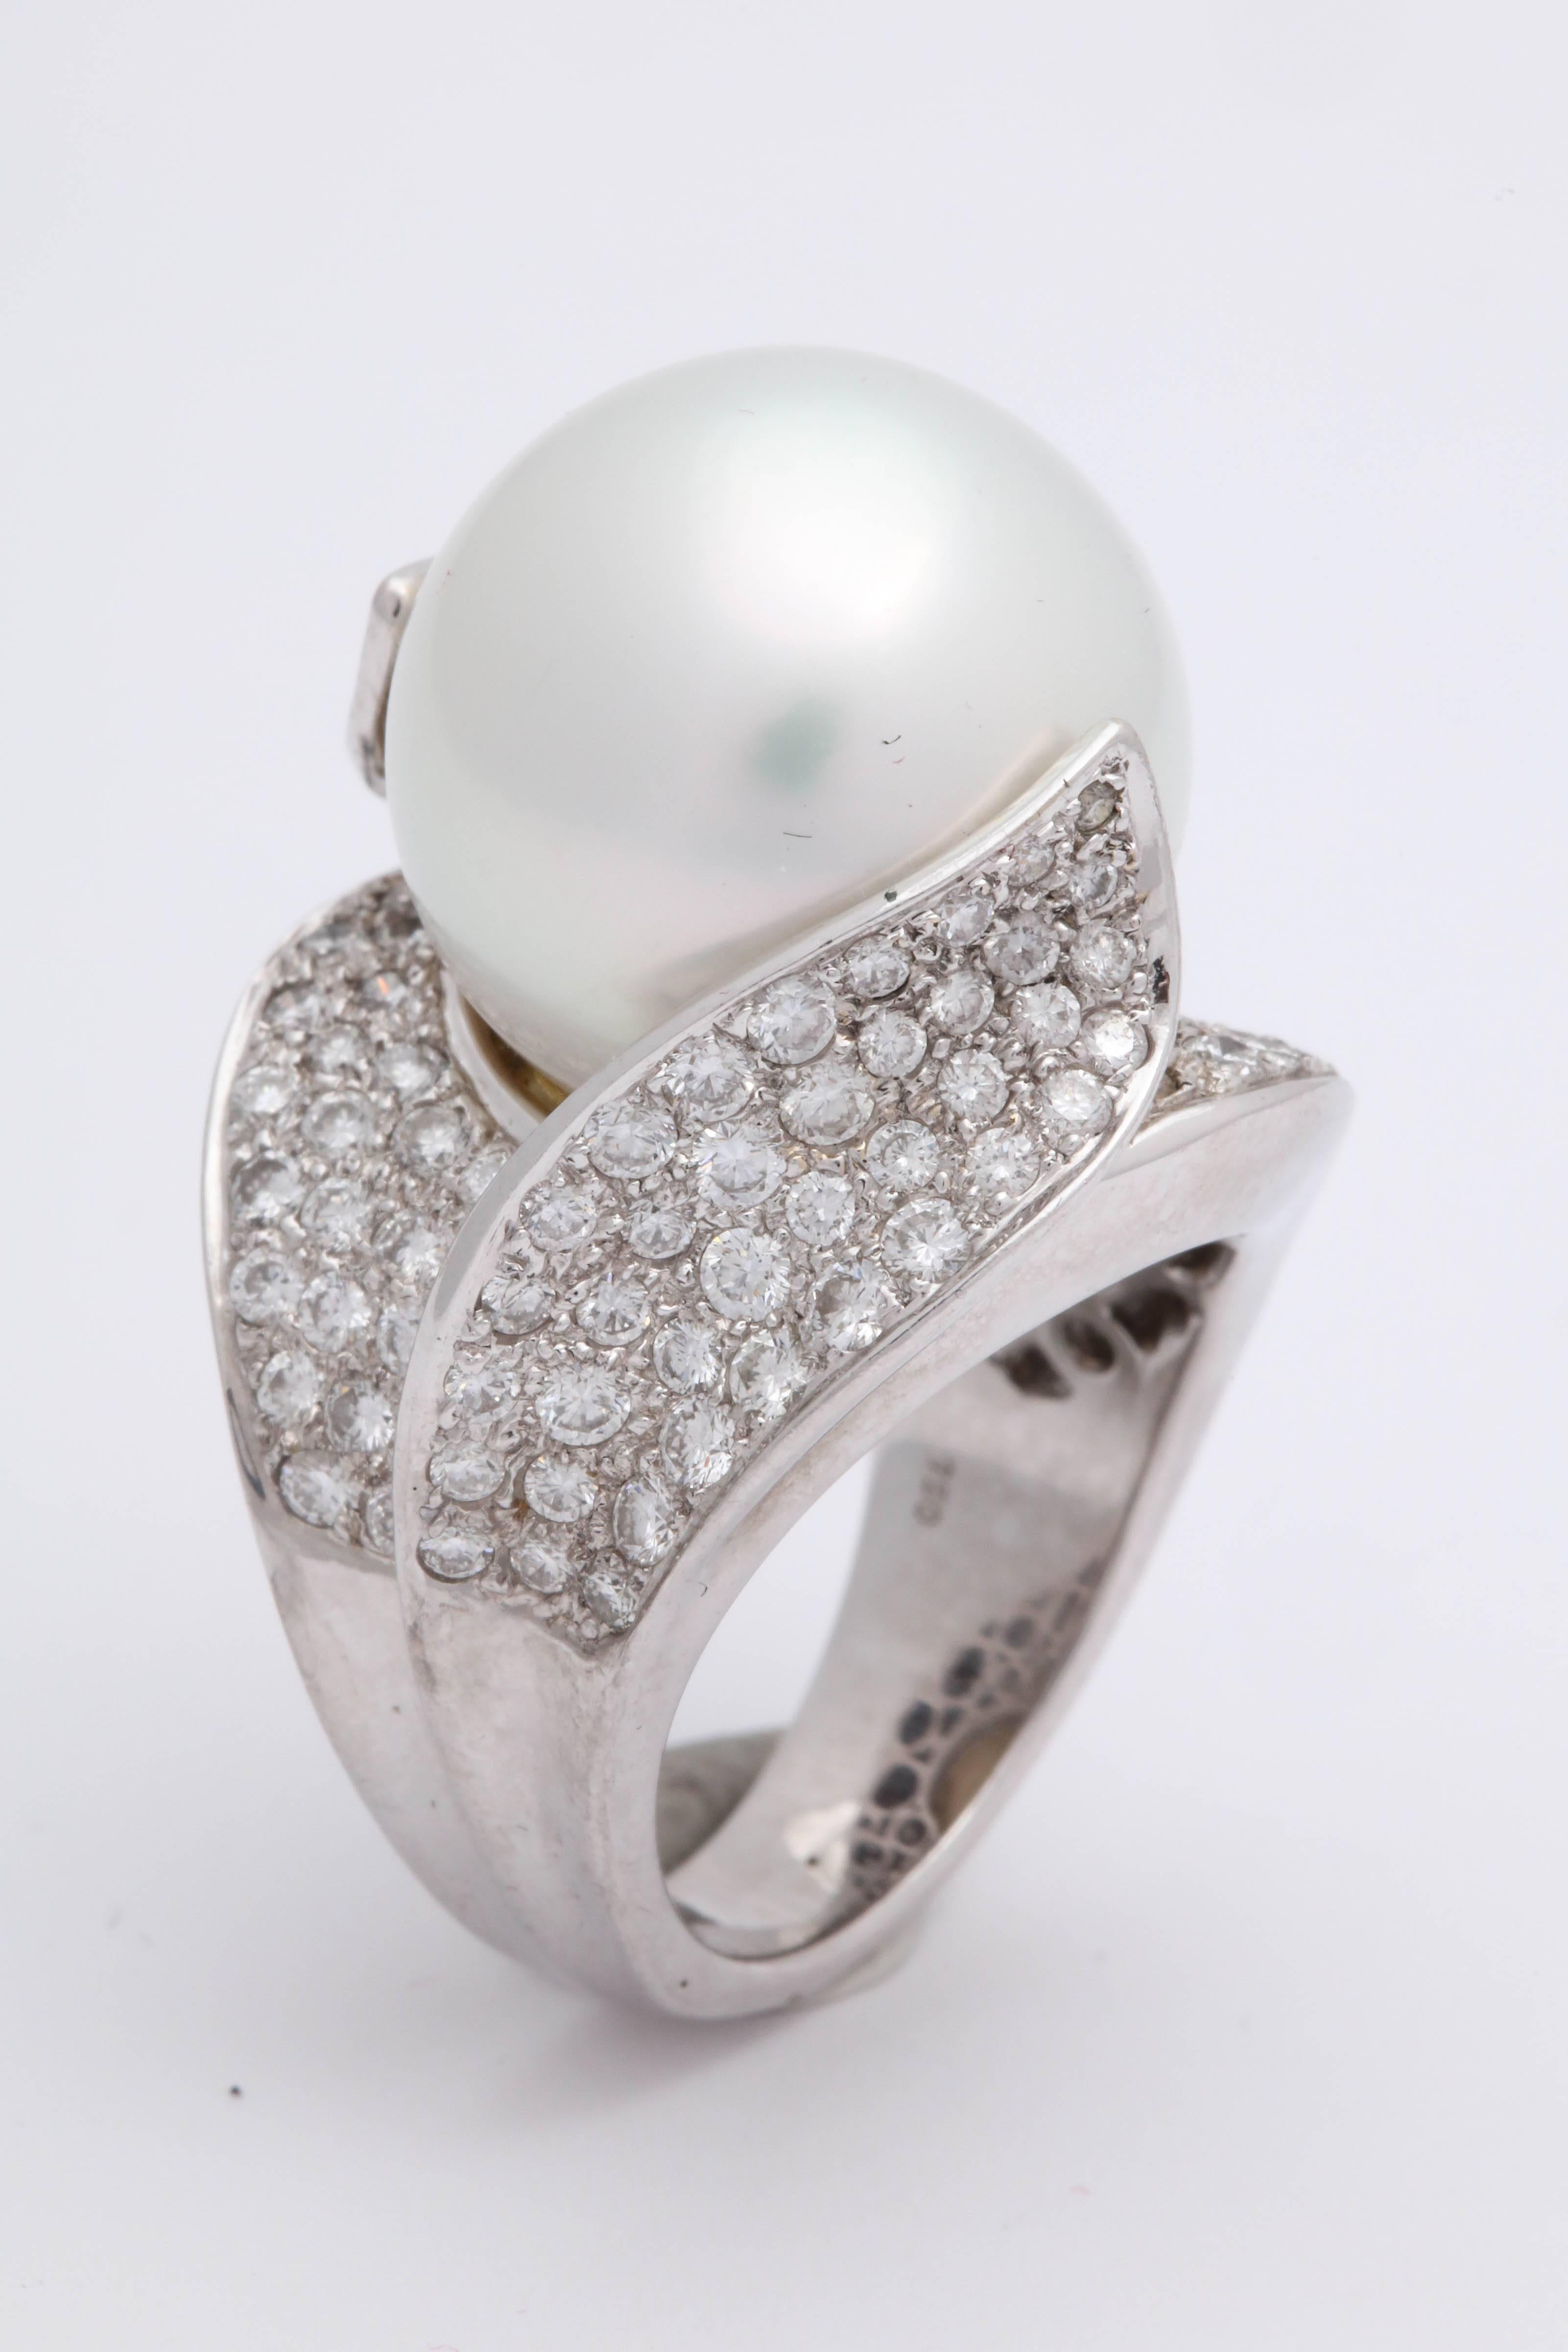 One Ladies Cocktail Style Ring Created In 18kt White Gold Embellished With Numerous Full Cut Diamonds Weighing Approximately 3 Carats Total Weight. Dome Ring Is Centering A Large Beautiful Color And Luster High Quality 17MM White South Sea